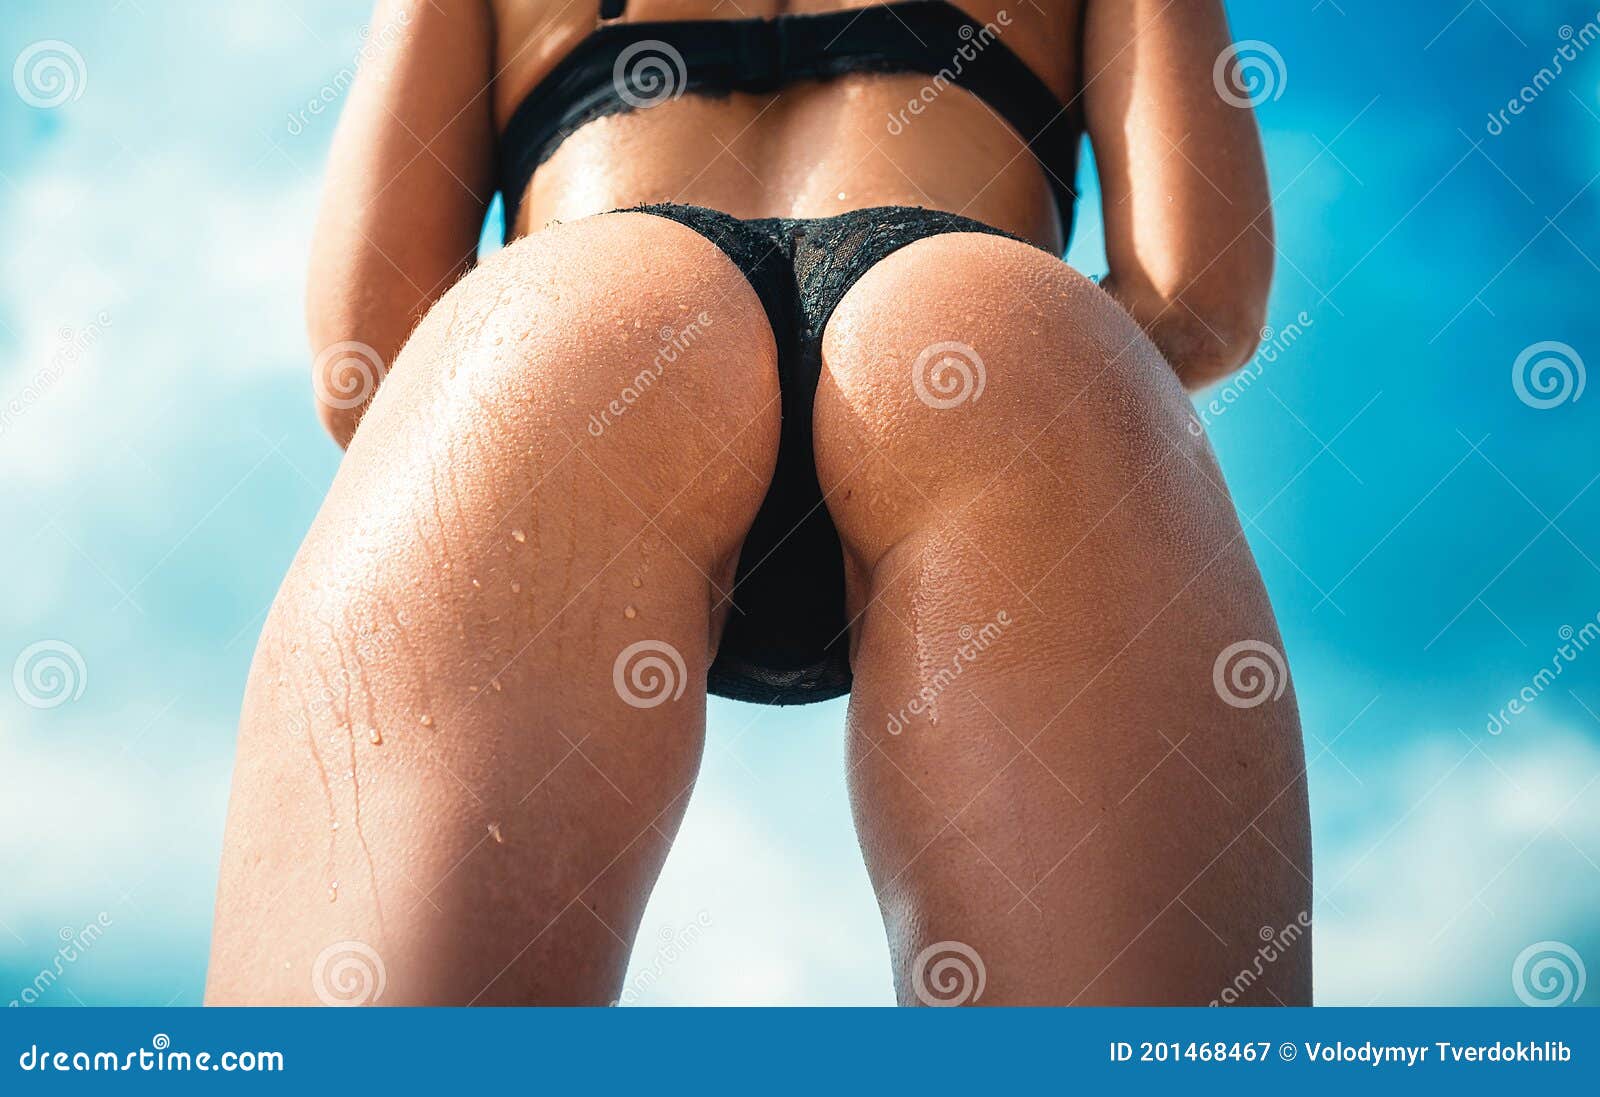 Sensual Attractive Young Woman Ass. she is Wearing Hot Lingerie. Relax in  Spa Stock Image - Image of buttocks, implants: 201468467